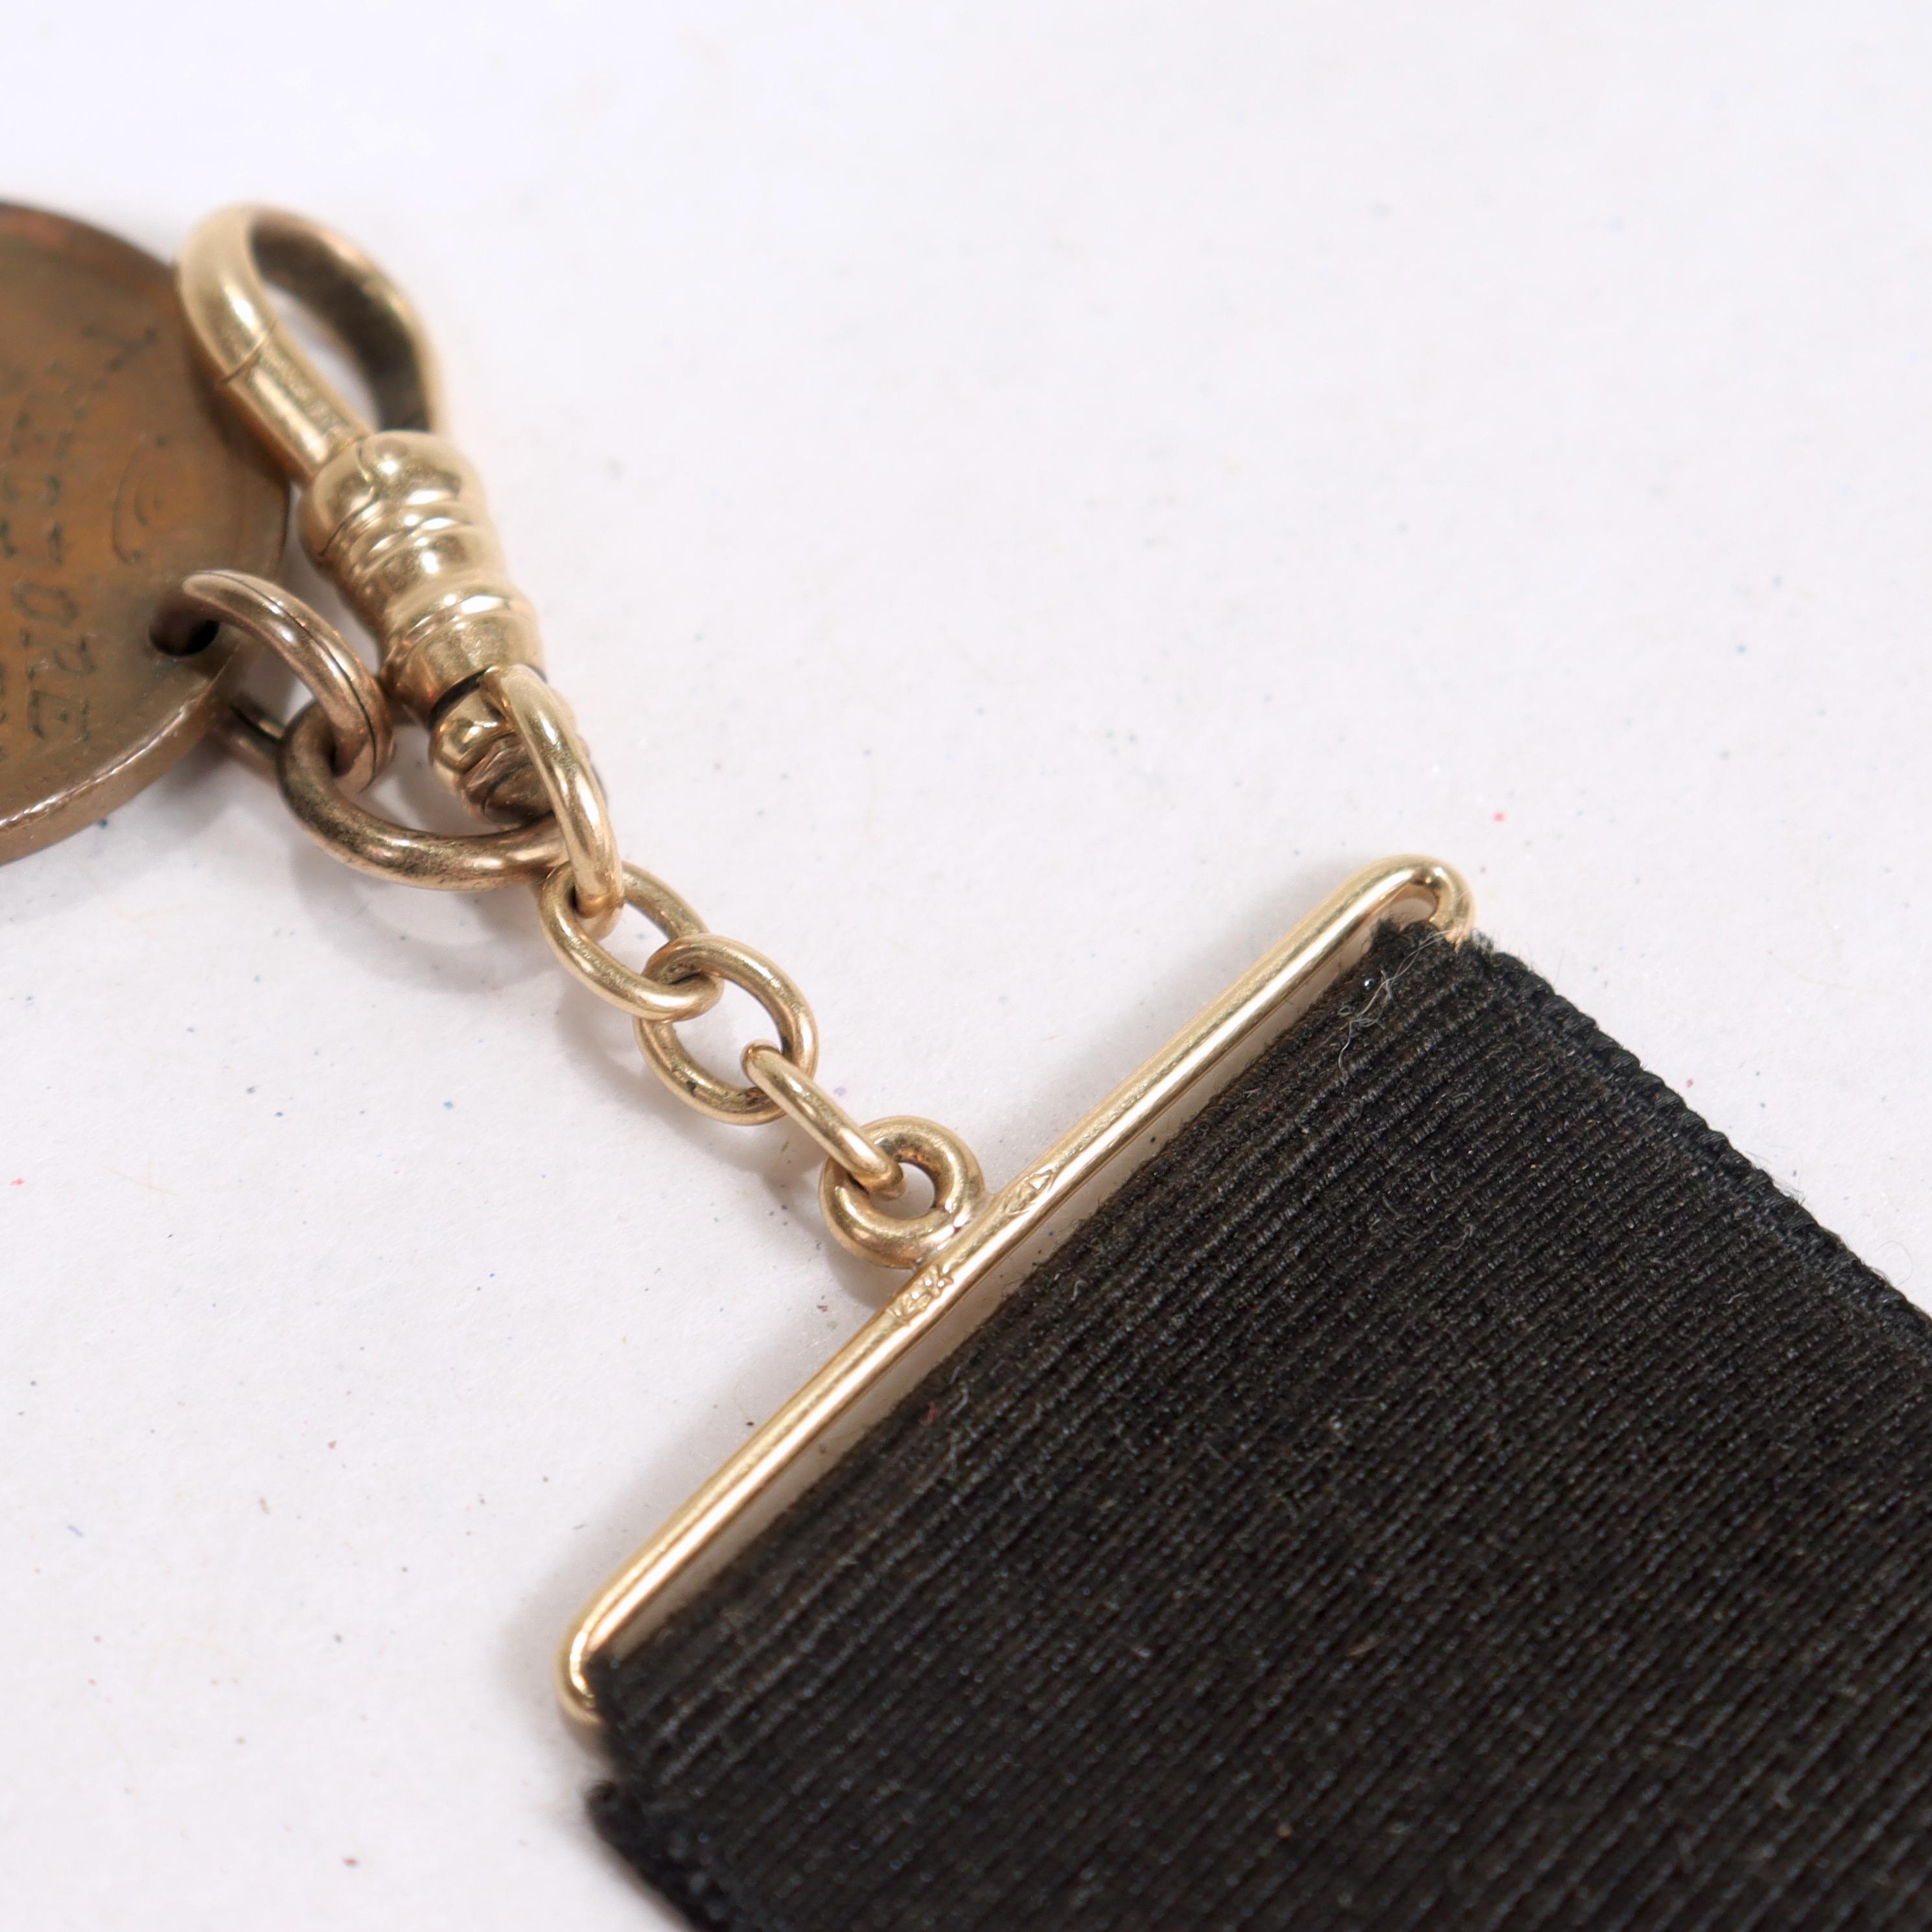 Presentation Indian Penny / Gold Quartz Watch Fob from President Teddy Roosevelt For Sale 1